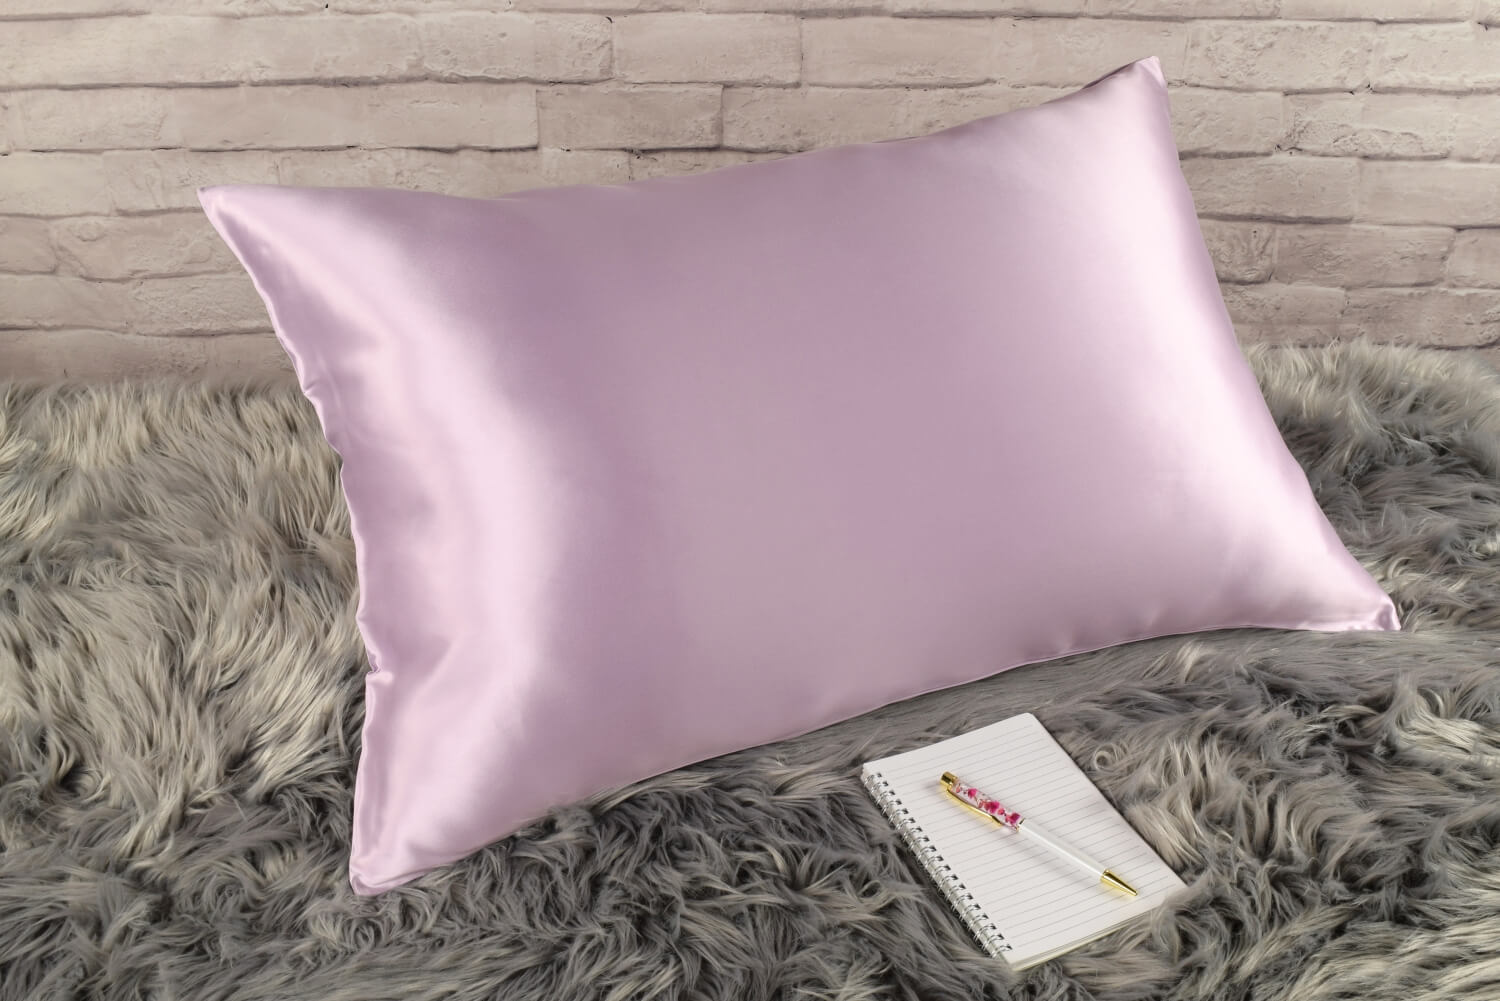 100% Silk Pillowcase for Hair Zippered Luxury 25 Momme Mulberry Silk Charmeuse Silk on Both Sides of Cover -Gift Wrapped- (Standard, Lavender)